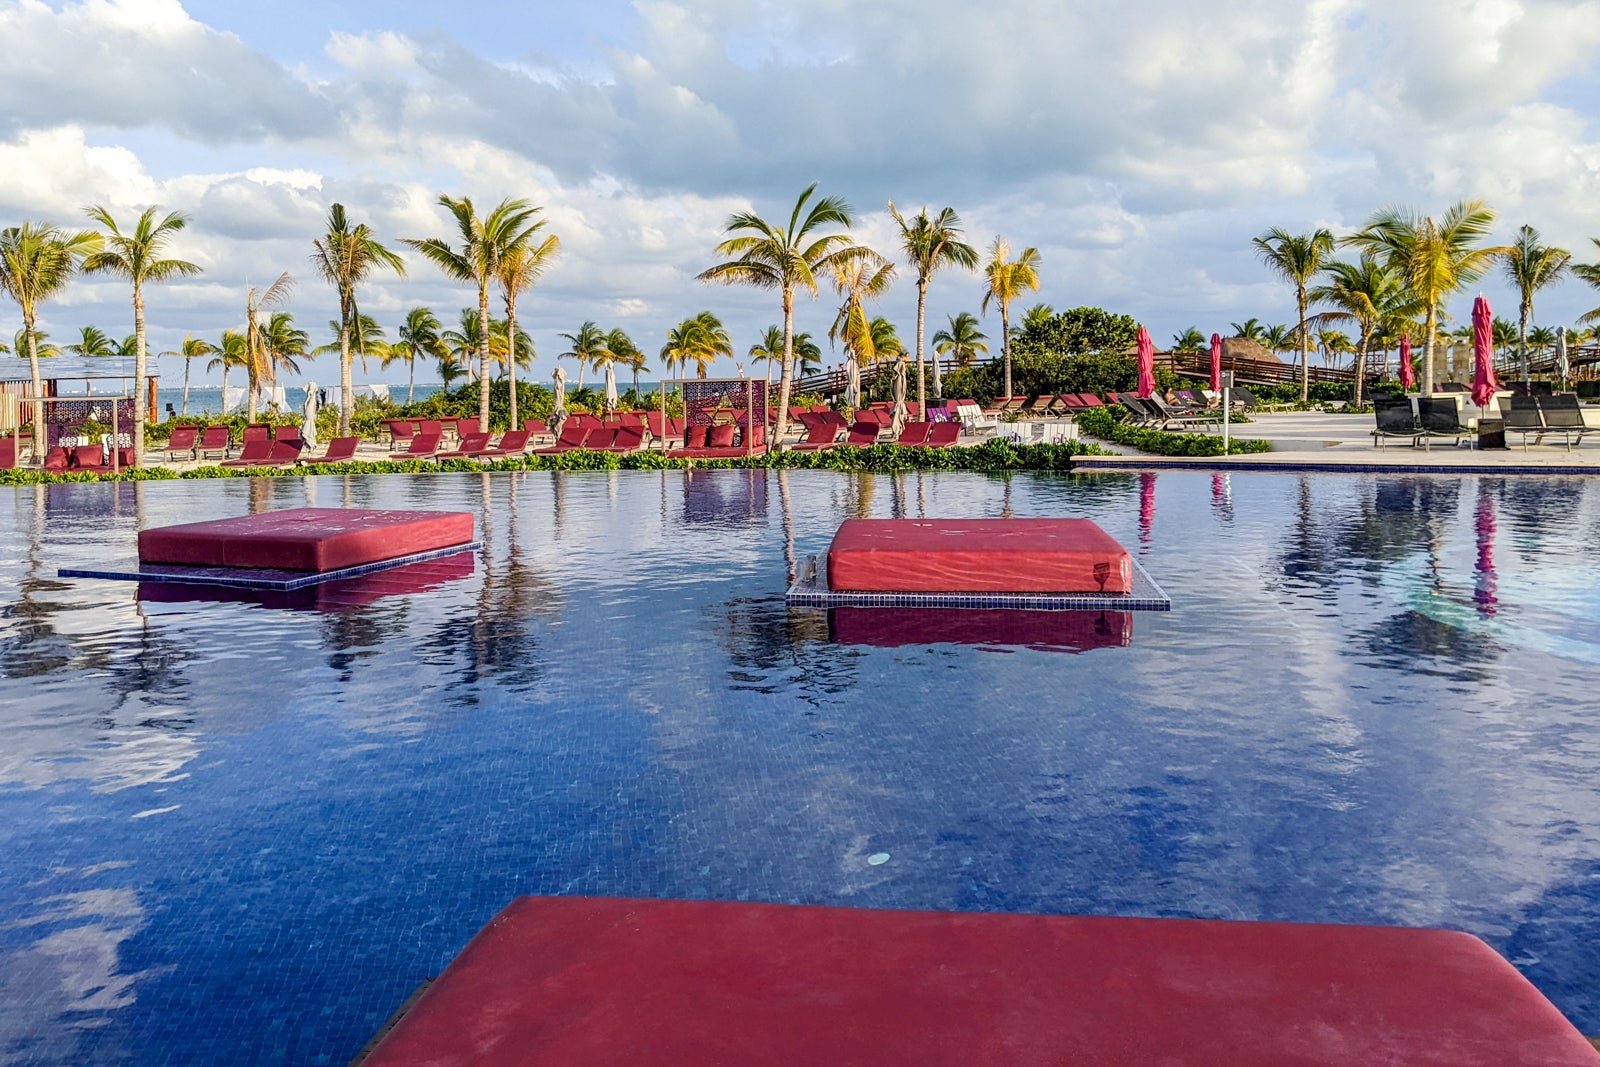 Planet Hollywood Cancun pool